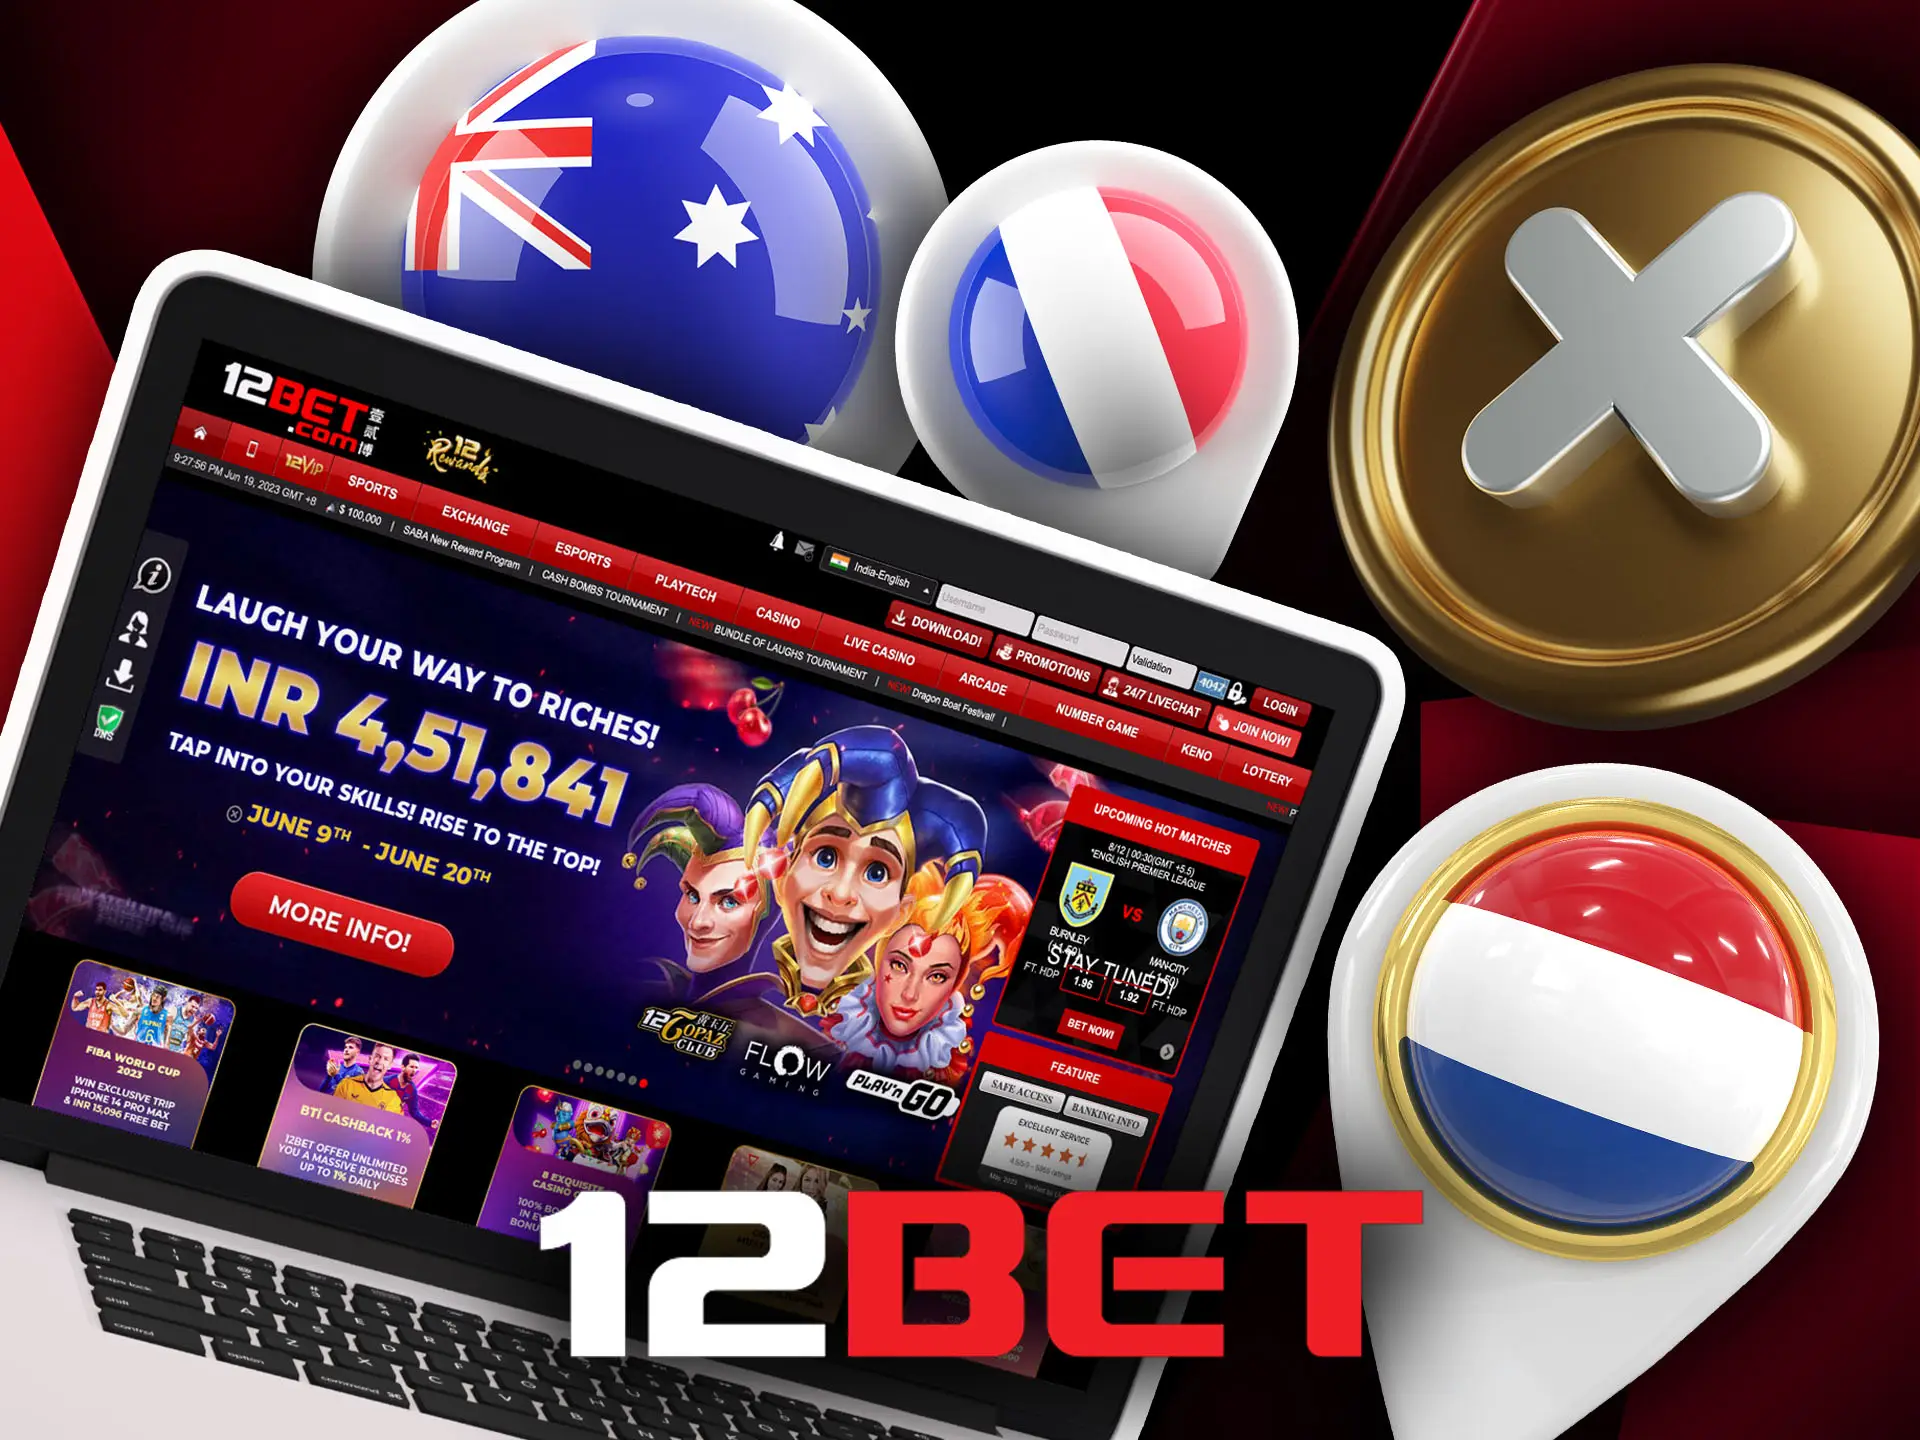 12bet has some excluded countries for website usage.